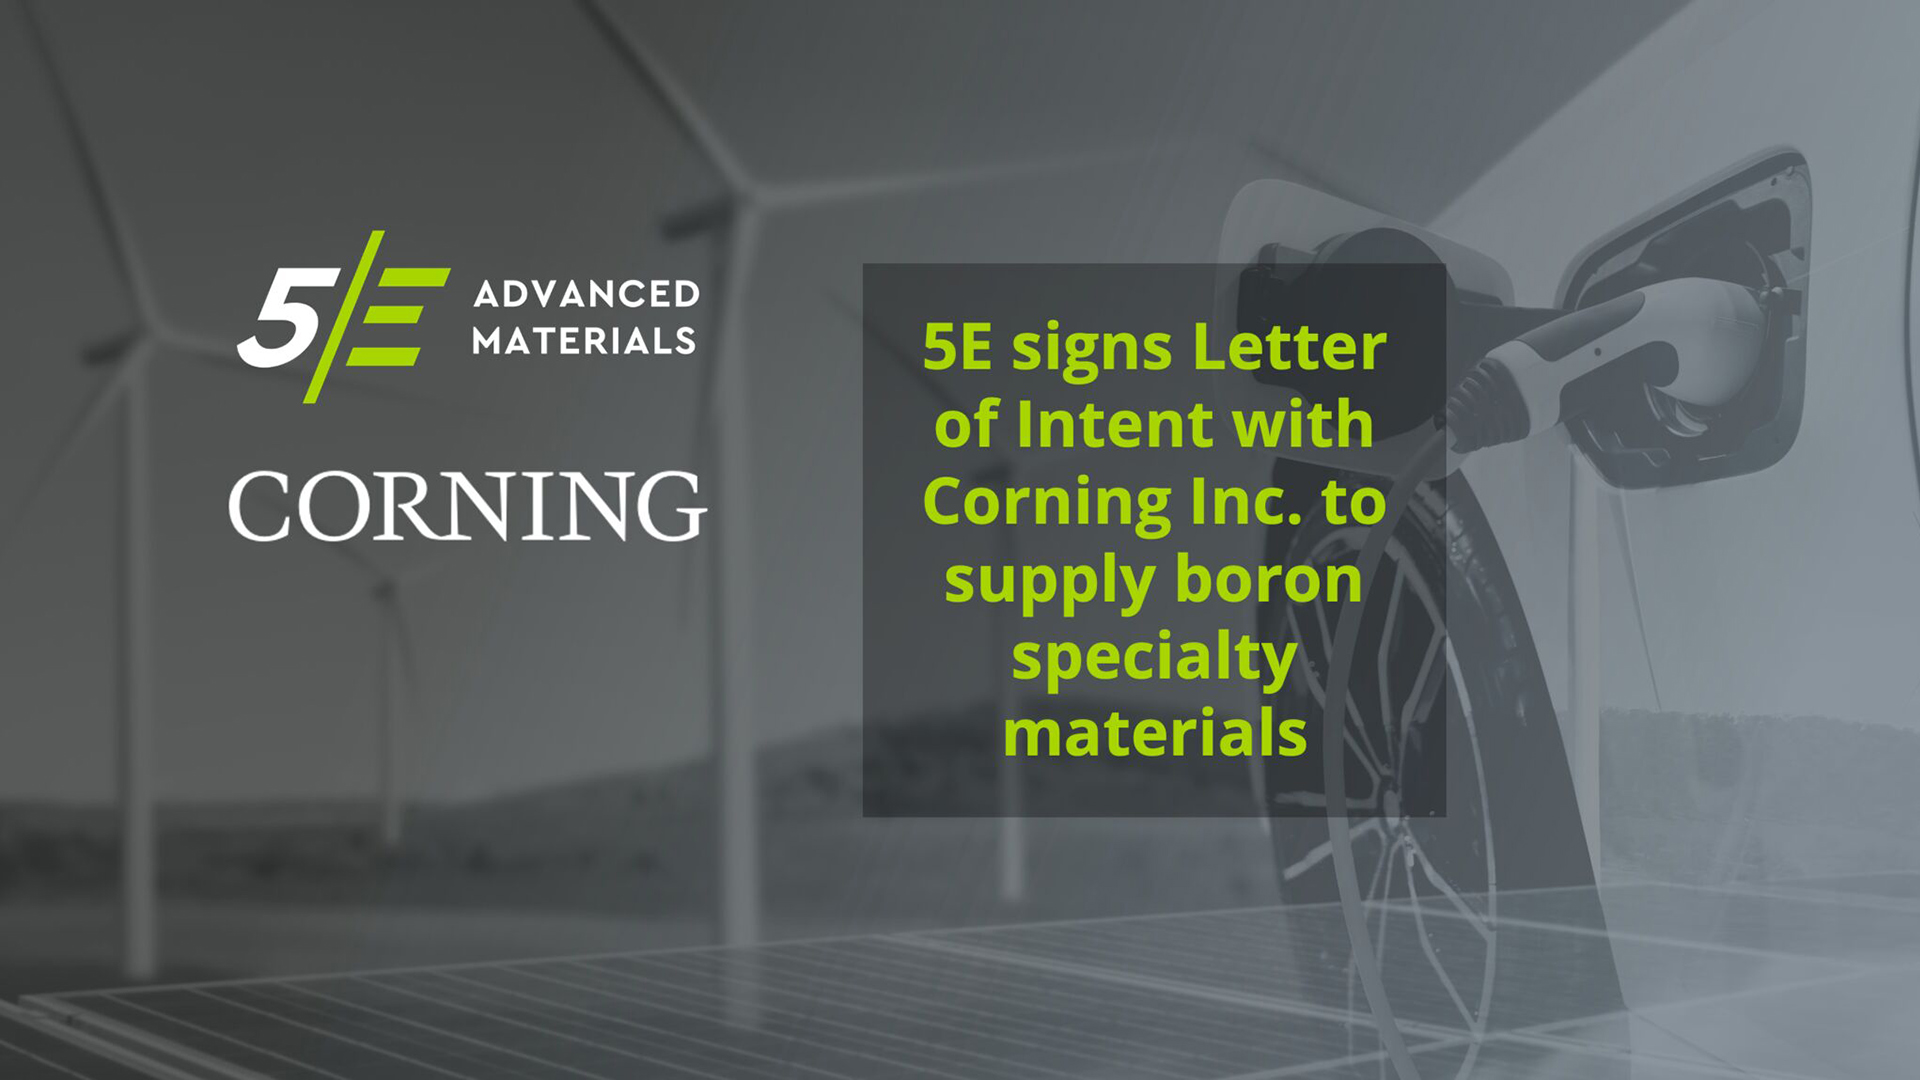 5E Advanced Materials, Inc Signs LOI with Corning Incorporated (NYSE: GLW)